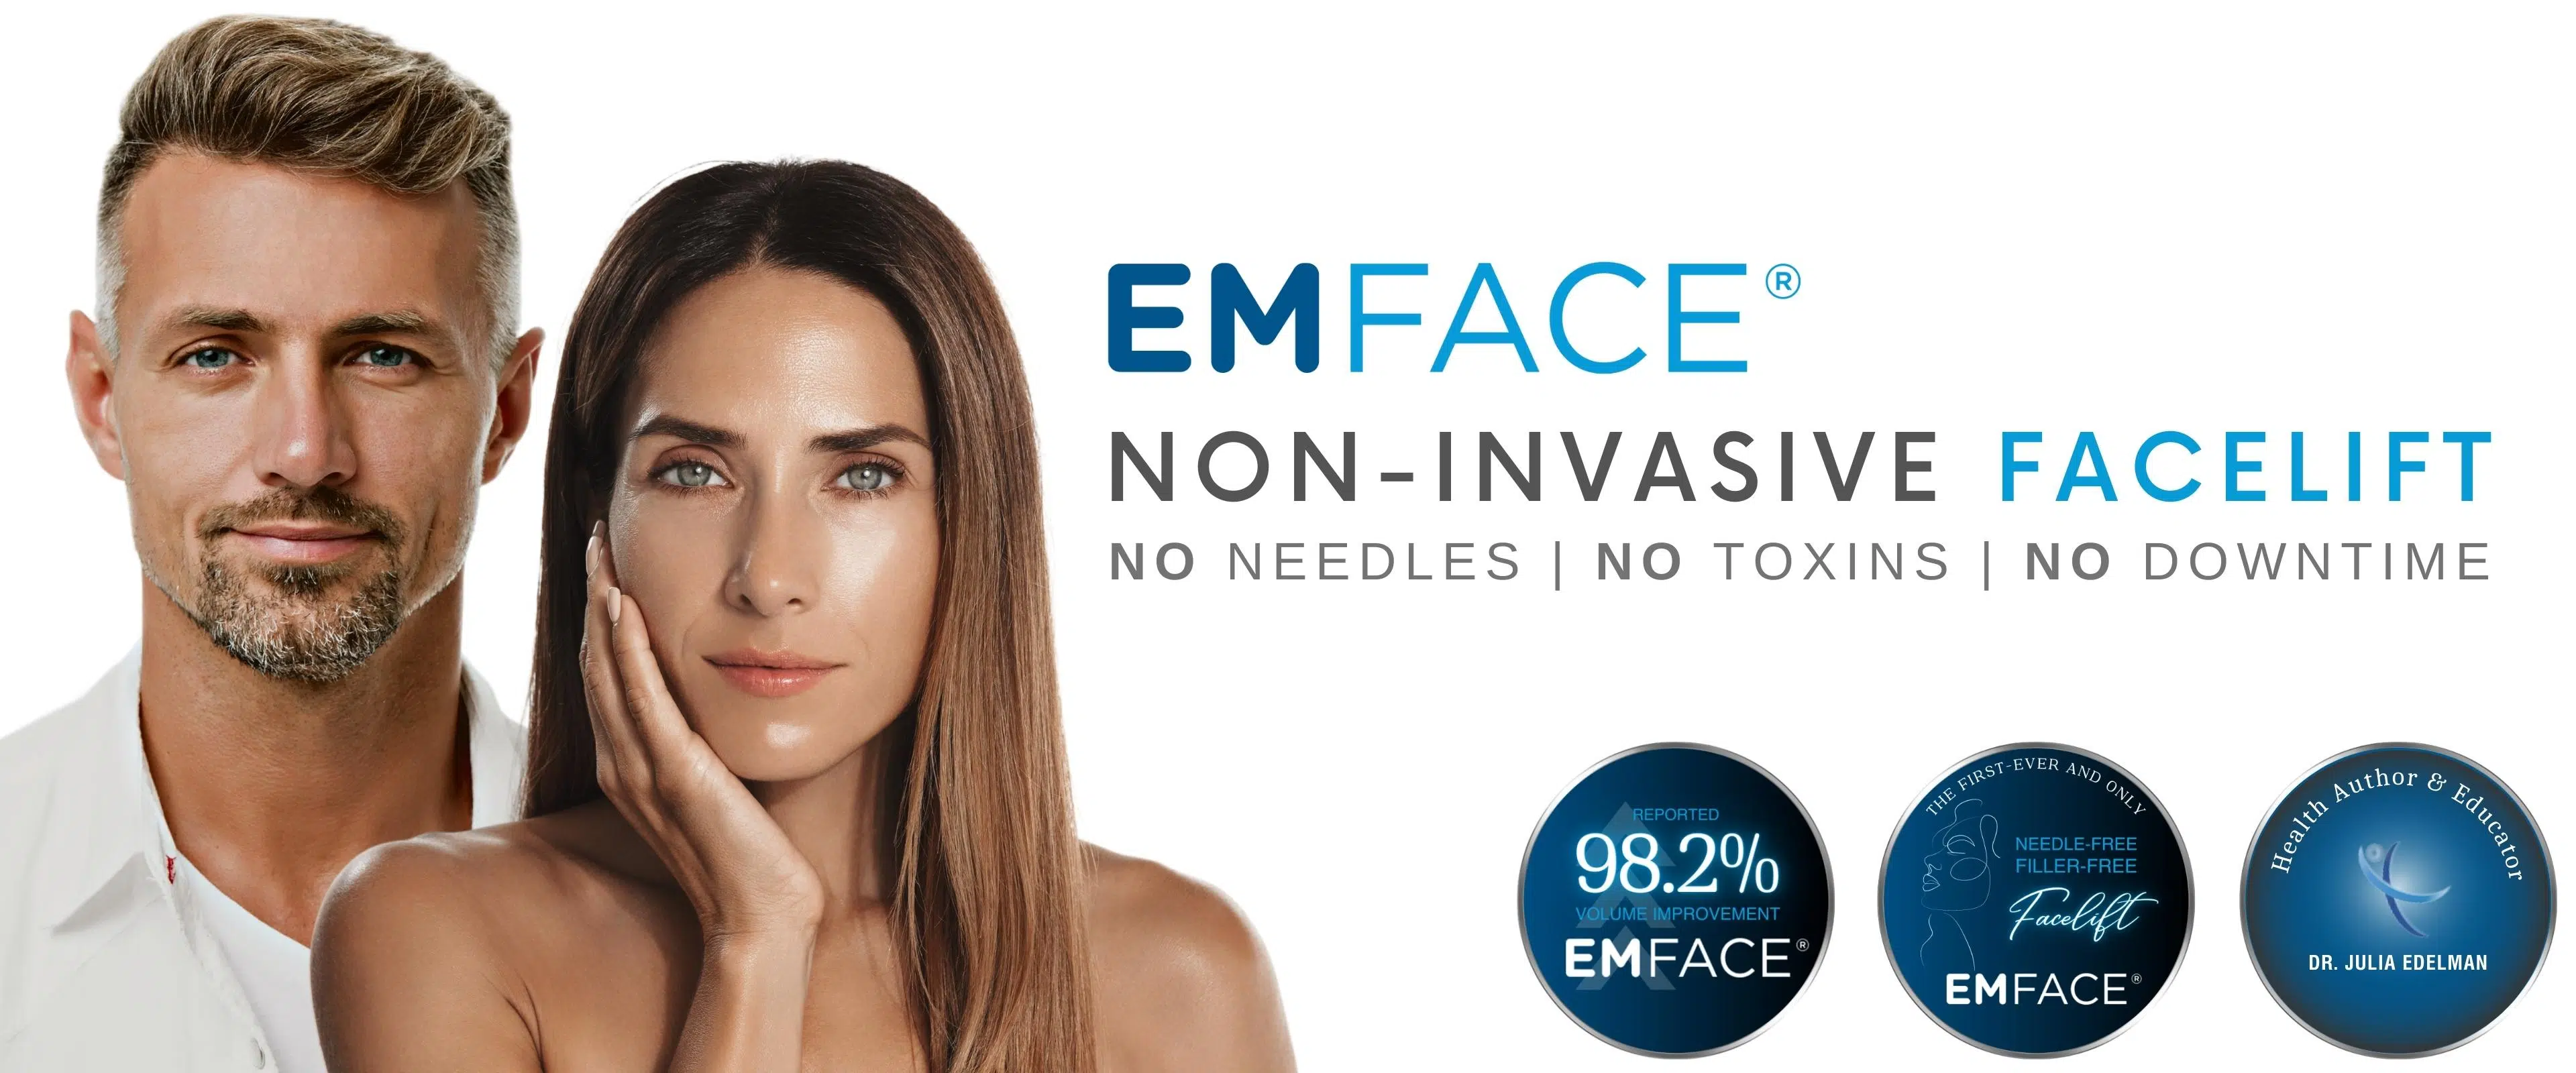 emface-the-new-england-center-for-body-sculpting-middleboro-ma-web